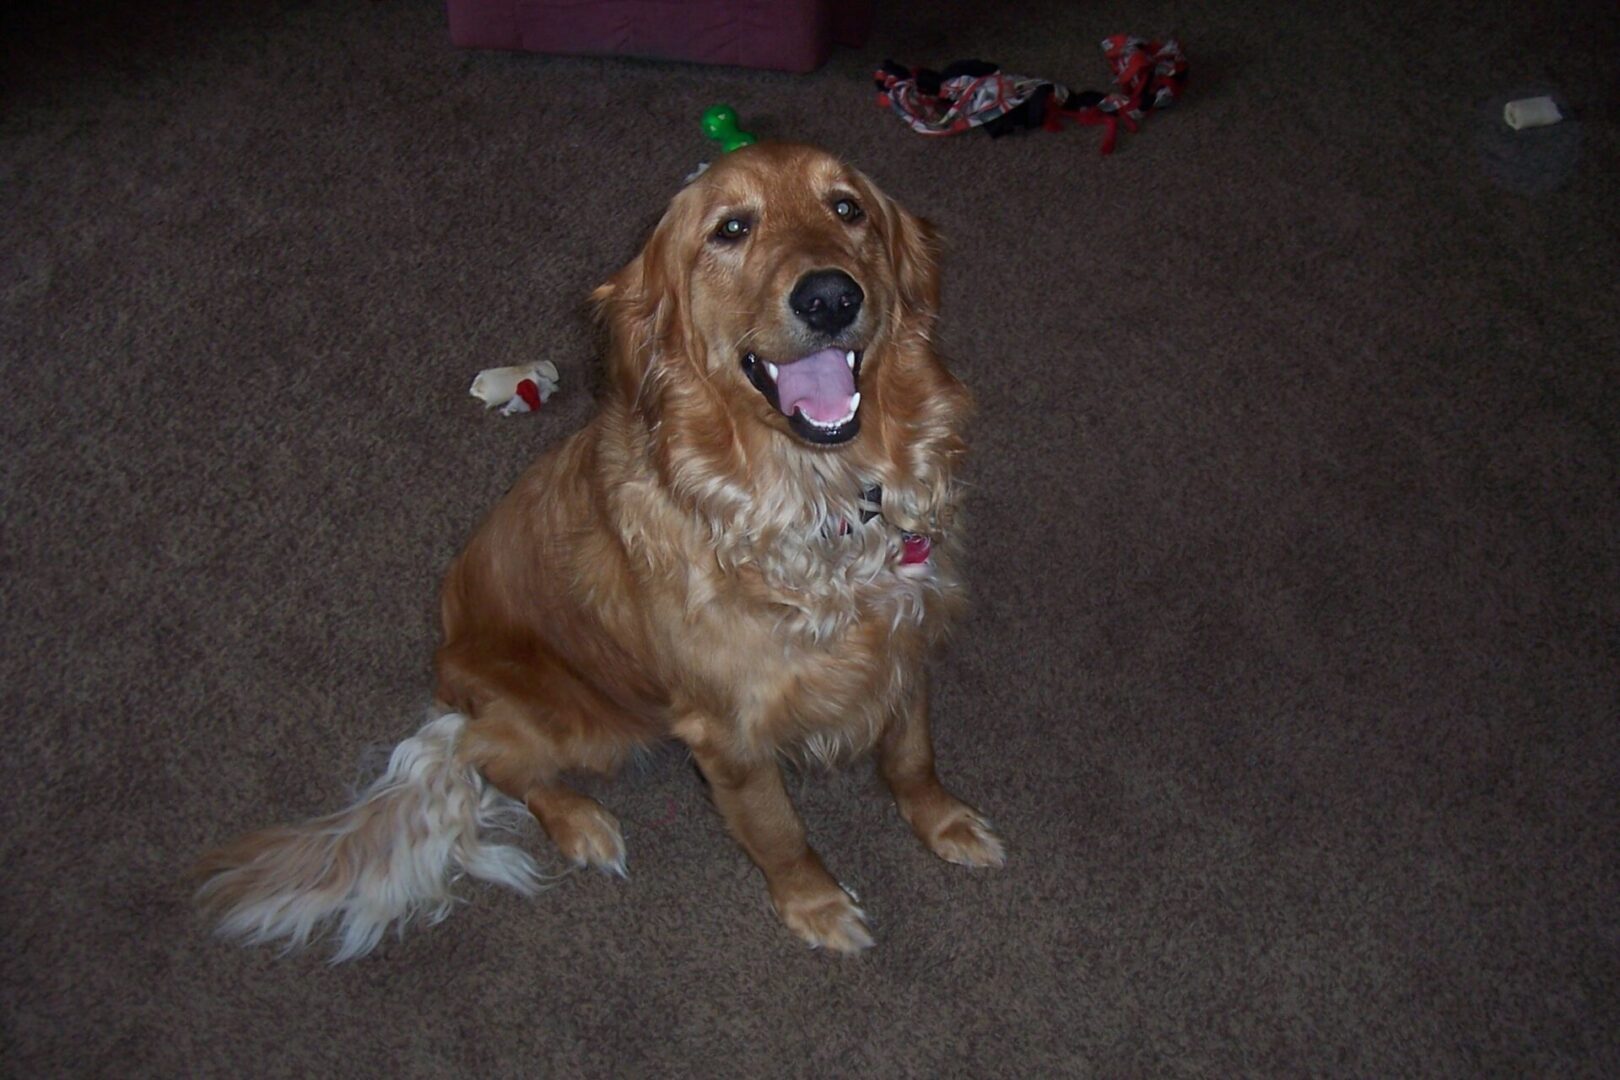 A golden retriever sitting on a carpet with toys scattered around.